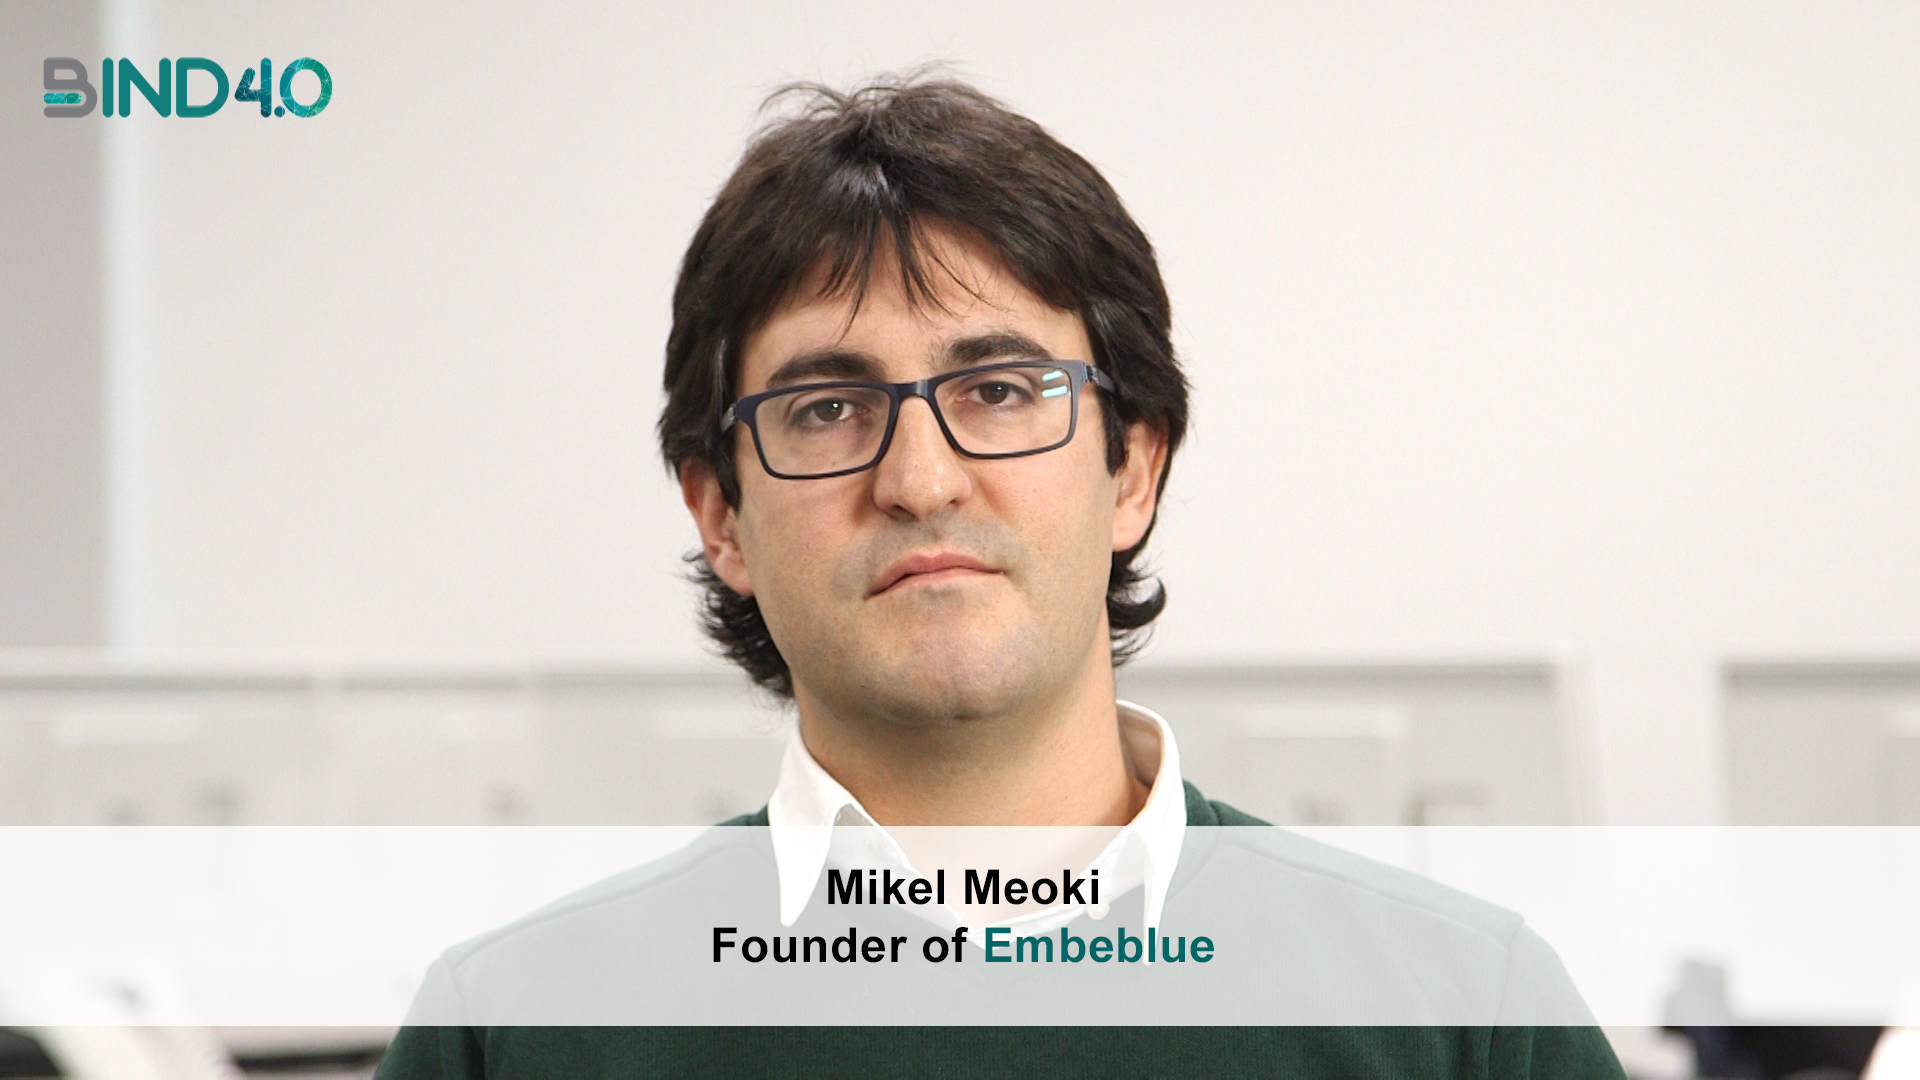 Mikel Meoki (Embeblue): "We design, produce and program IoT devices"